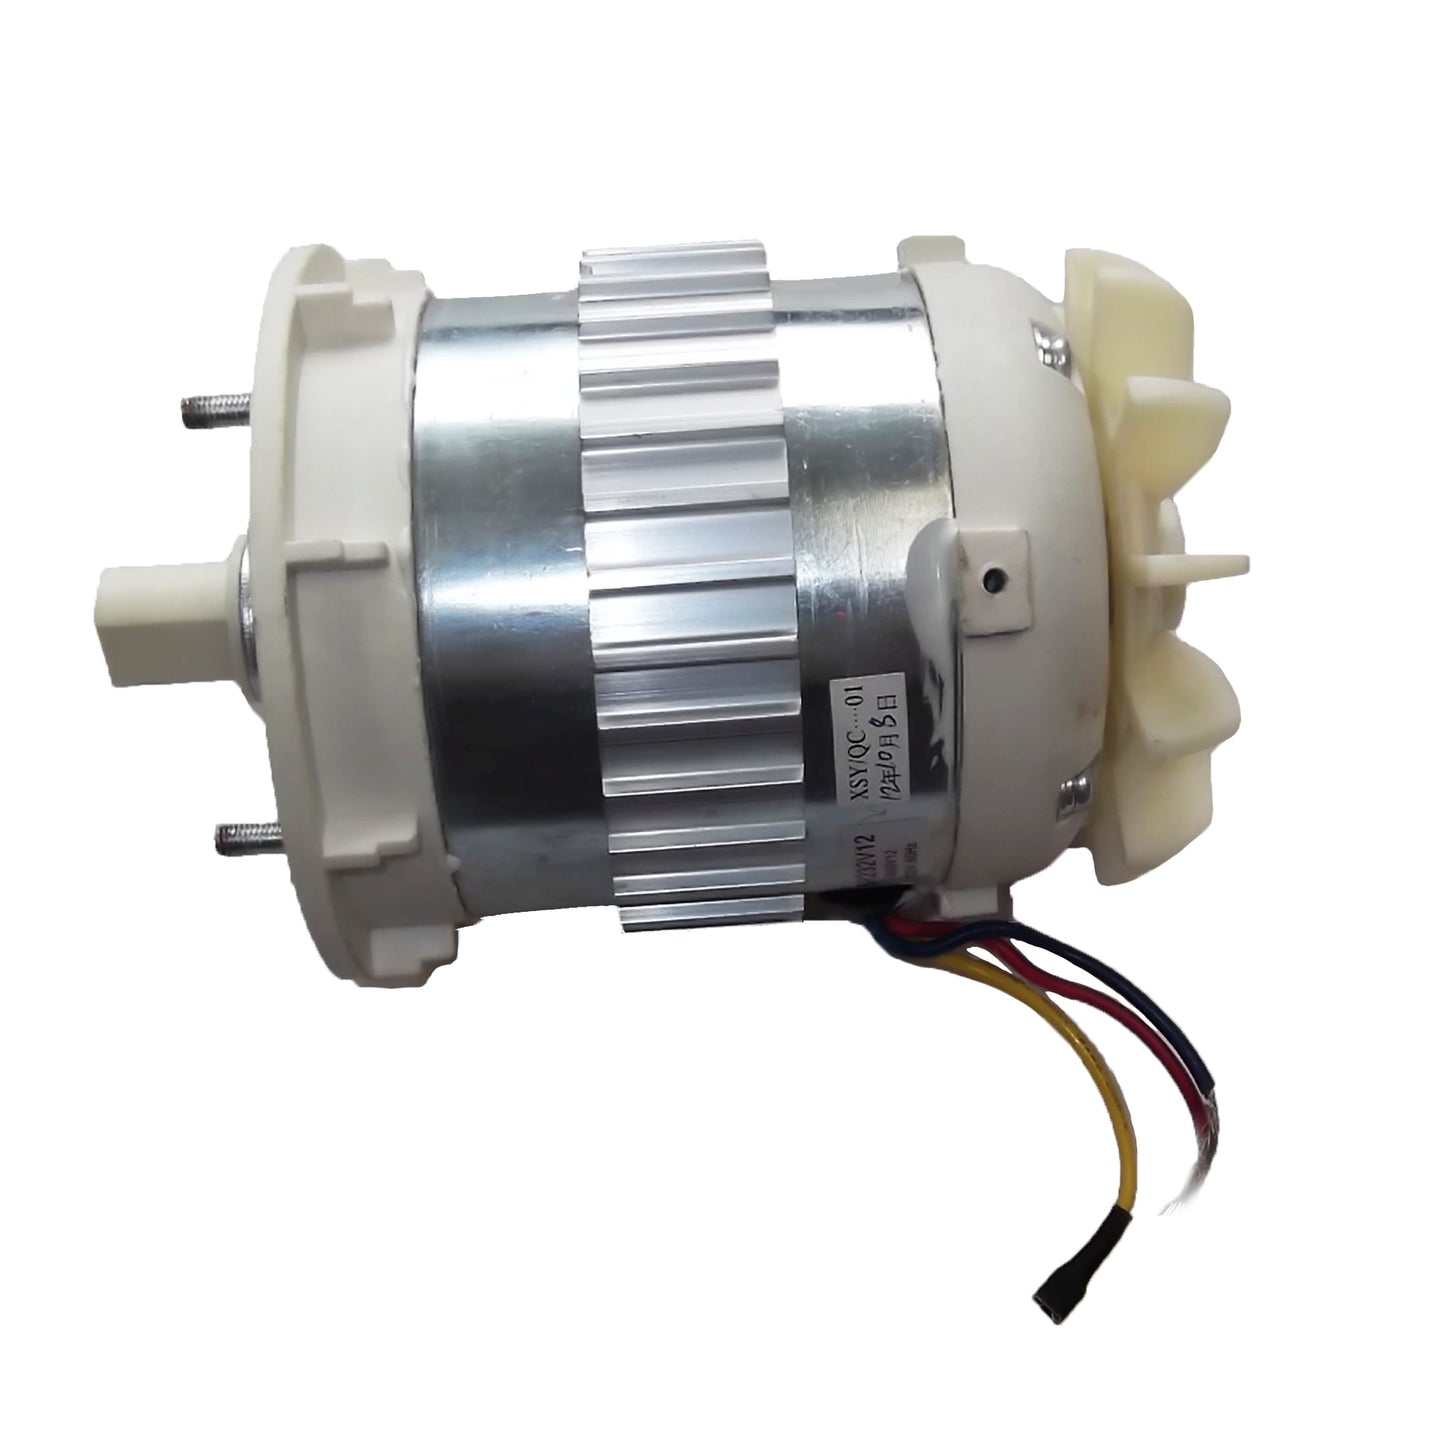 Motor for BR-282A Inflatable Blower